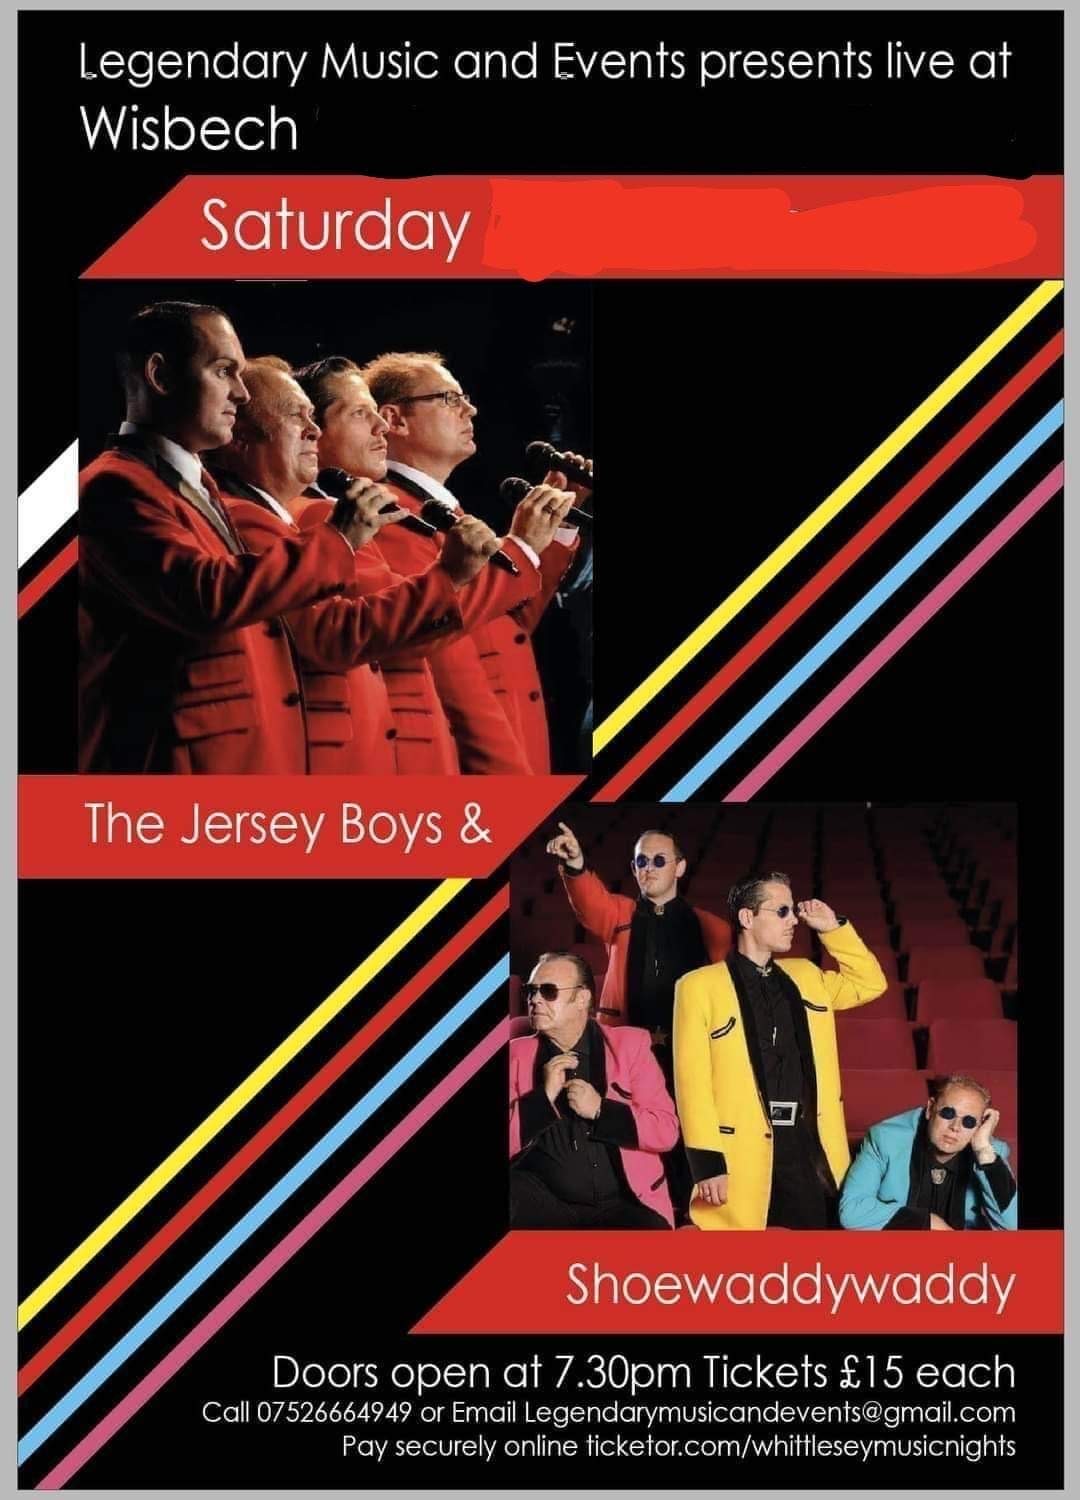 Shoewaddywaddy v’s Jersey Boys  on Dec 09, 19:30@Legends Events and Entertainment - Buy tickets and Get information on whittlesey music nights 